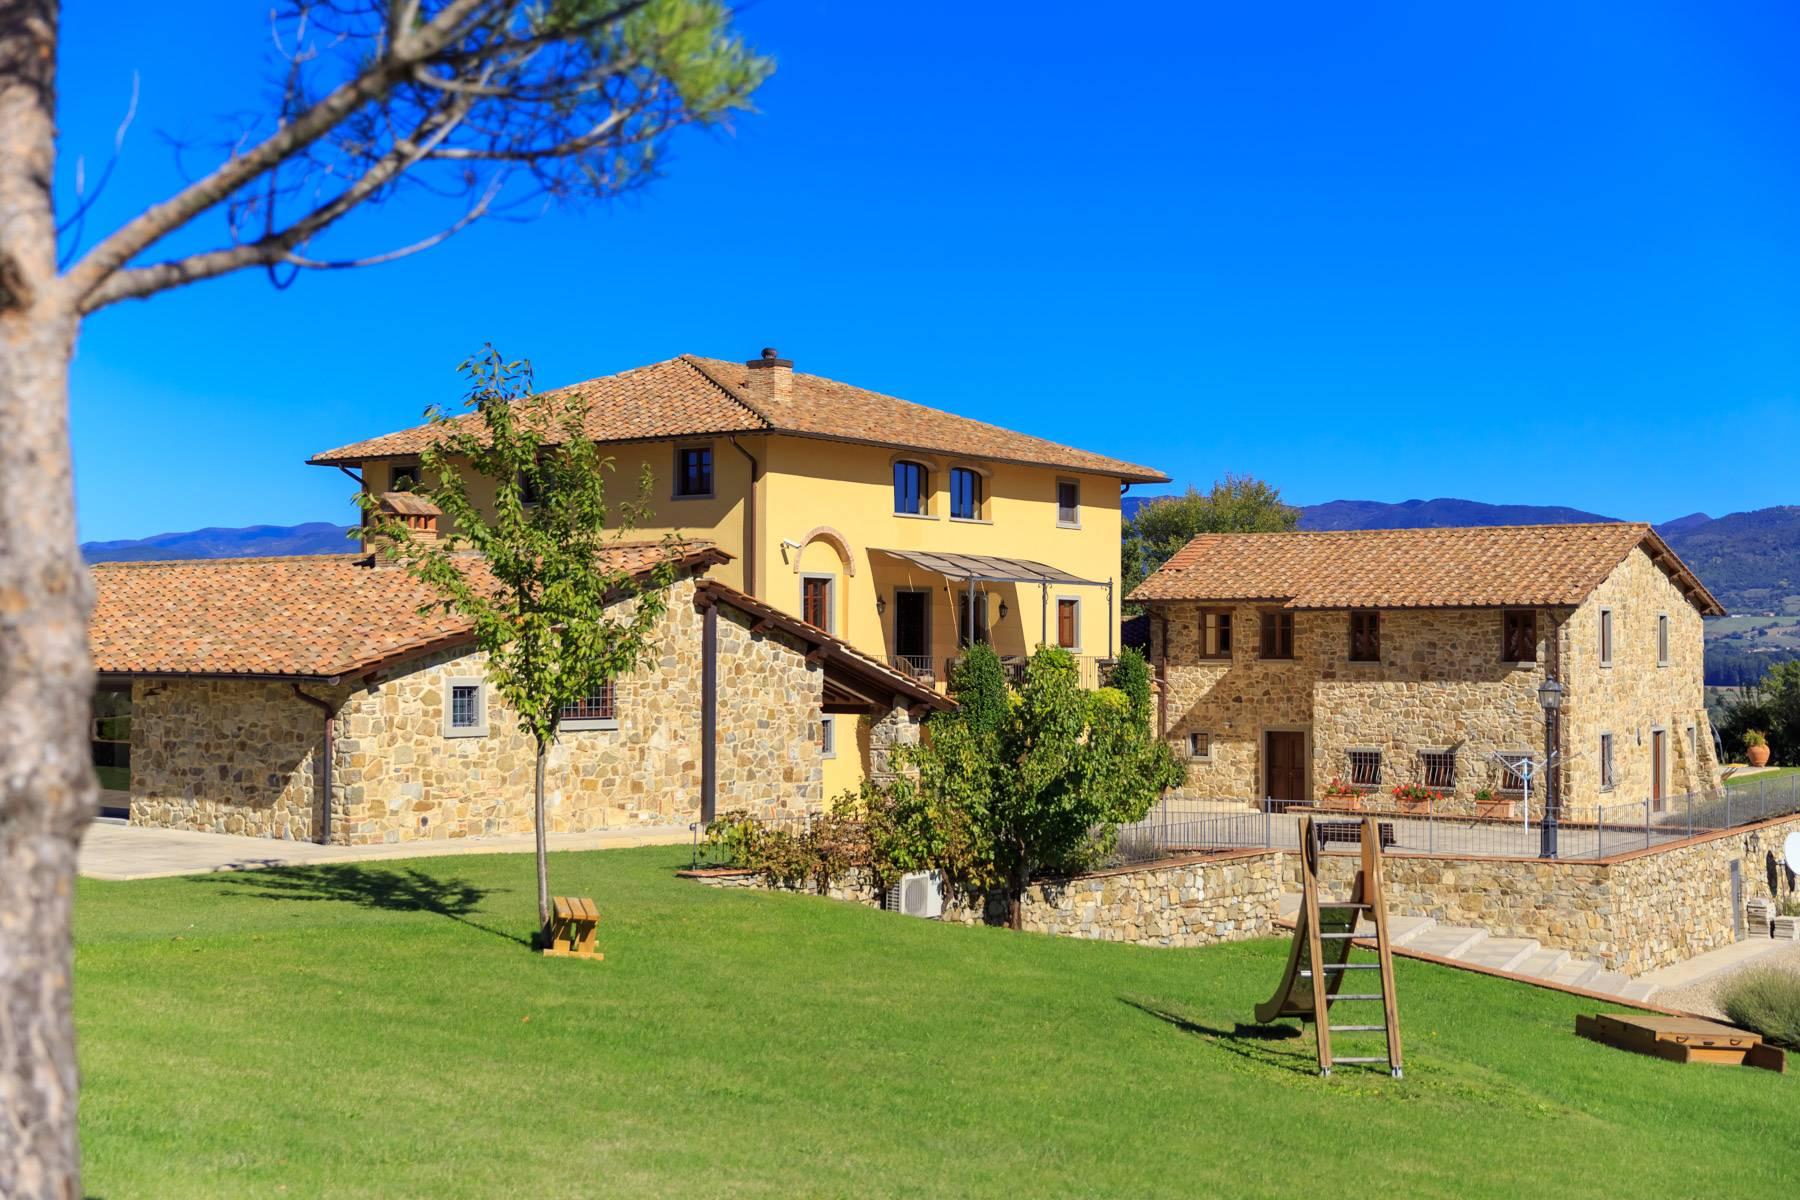 Marvelous estate with views over the Casentino valley - 5